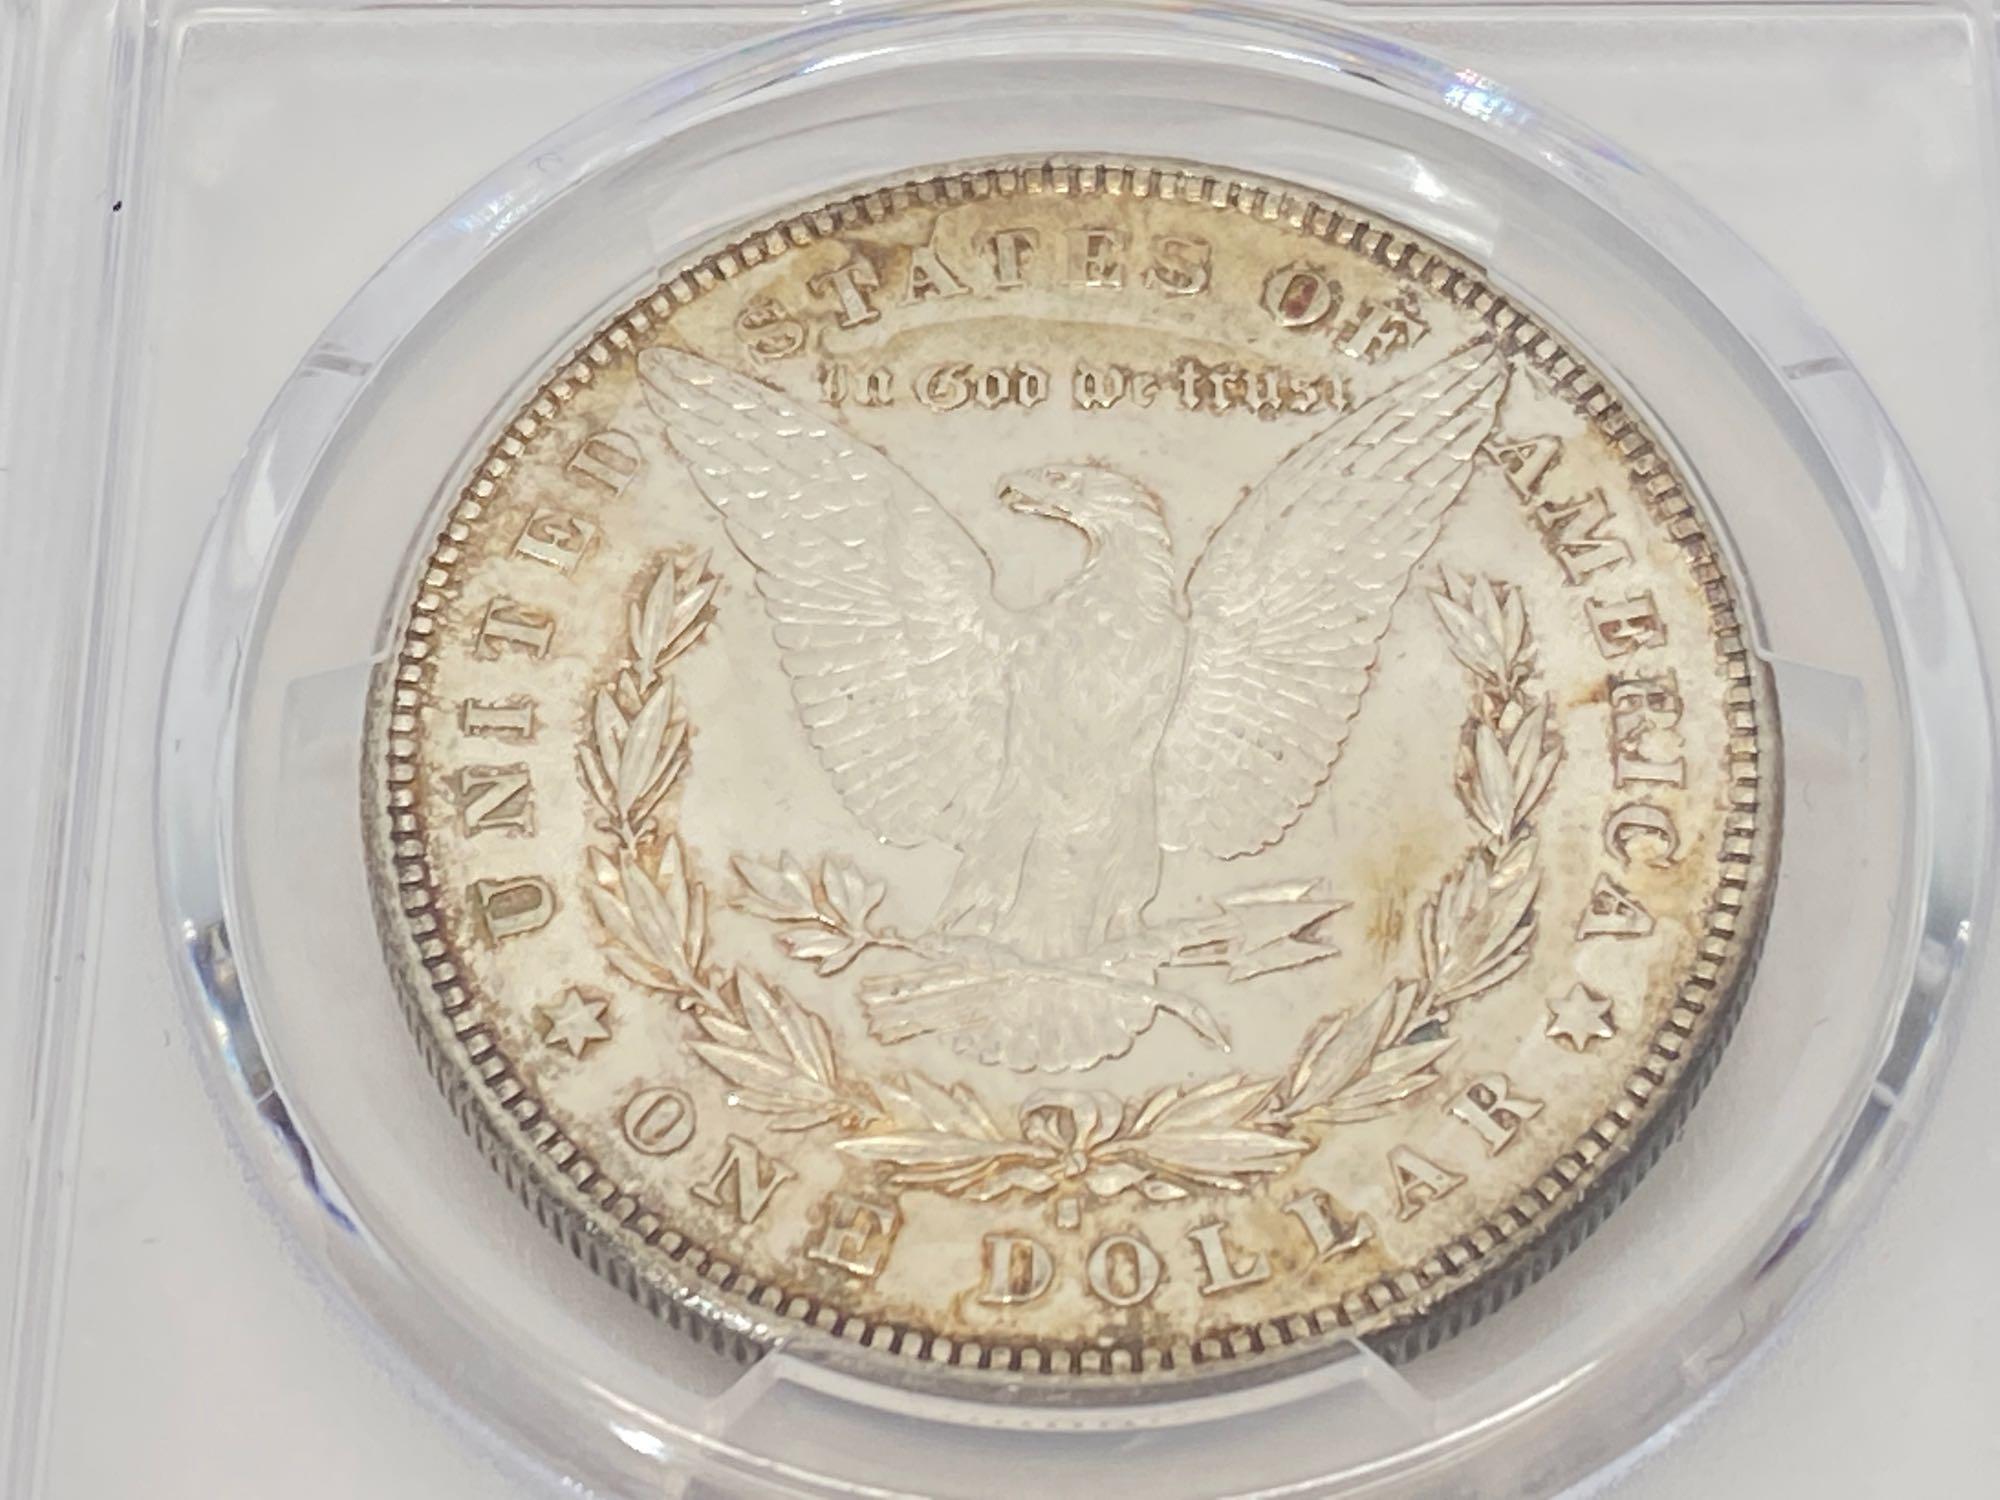 1878-S Morgan Dollar, PCGS Graded MS63, United States silver dollar coin